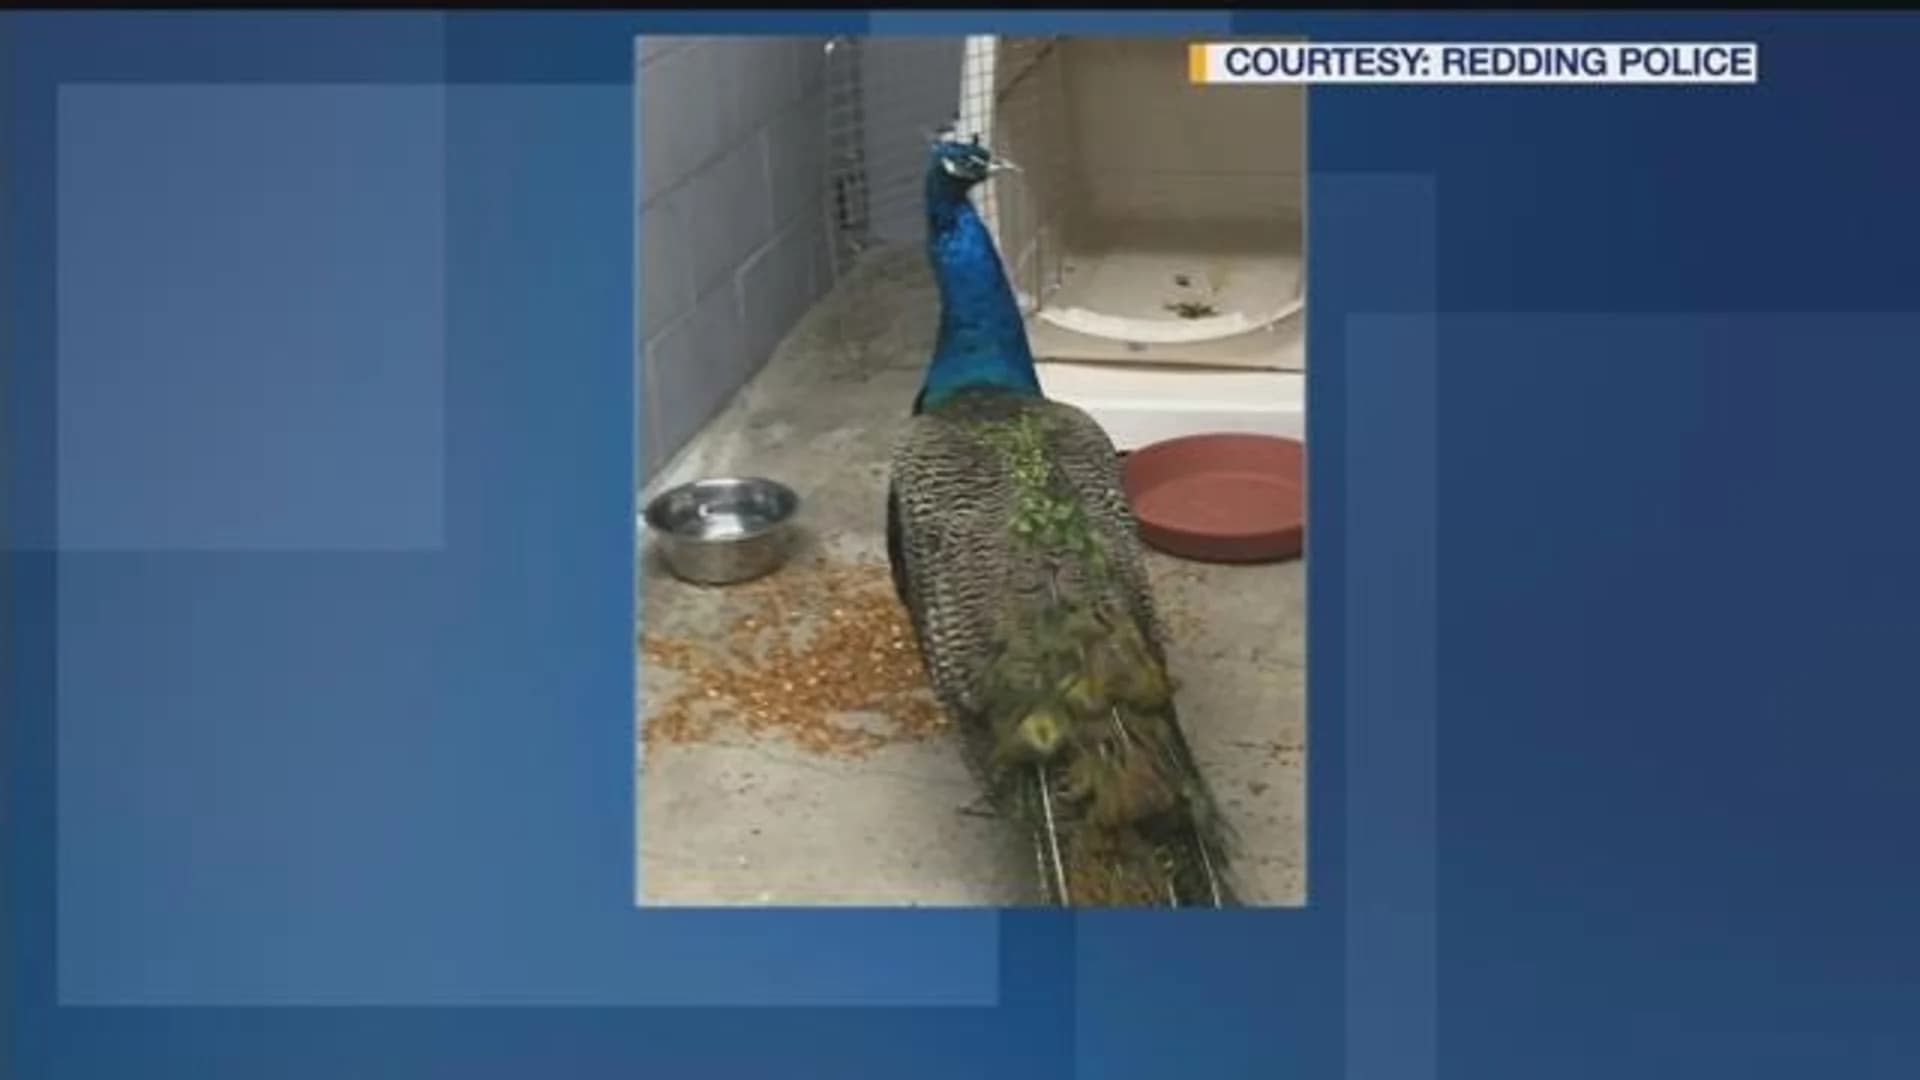 Connecticut police department post picture of lost peacock; reunite it with owner